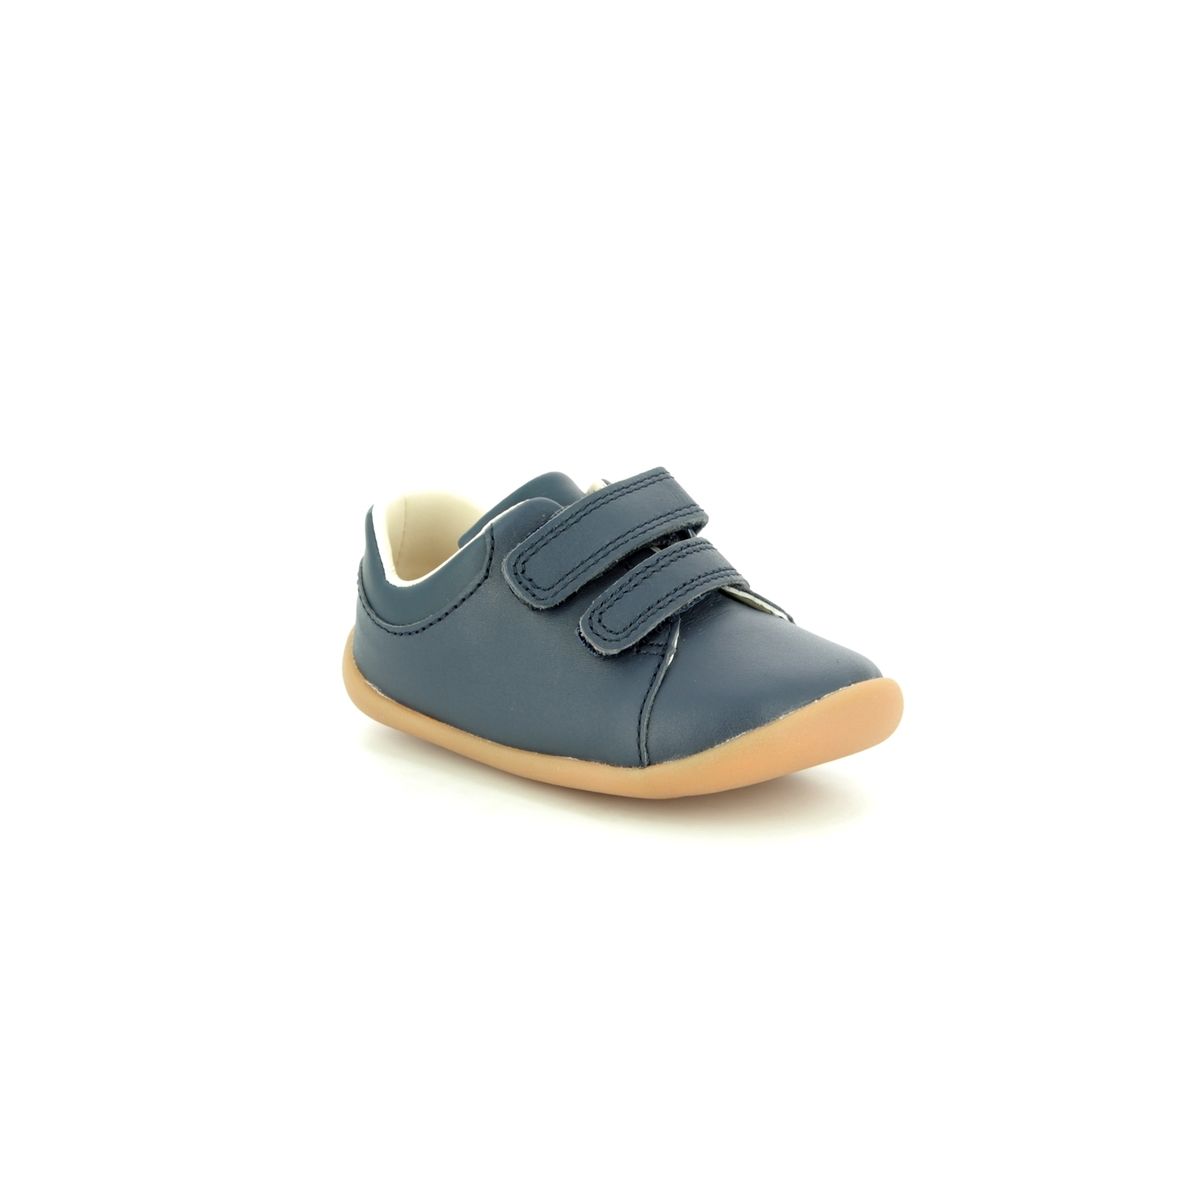 Clarks Roamer Craft T Navy Leather Kids Boys First Shoes 4228-66F in a Plain Leather in Size 4.5